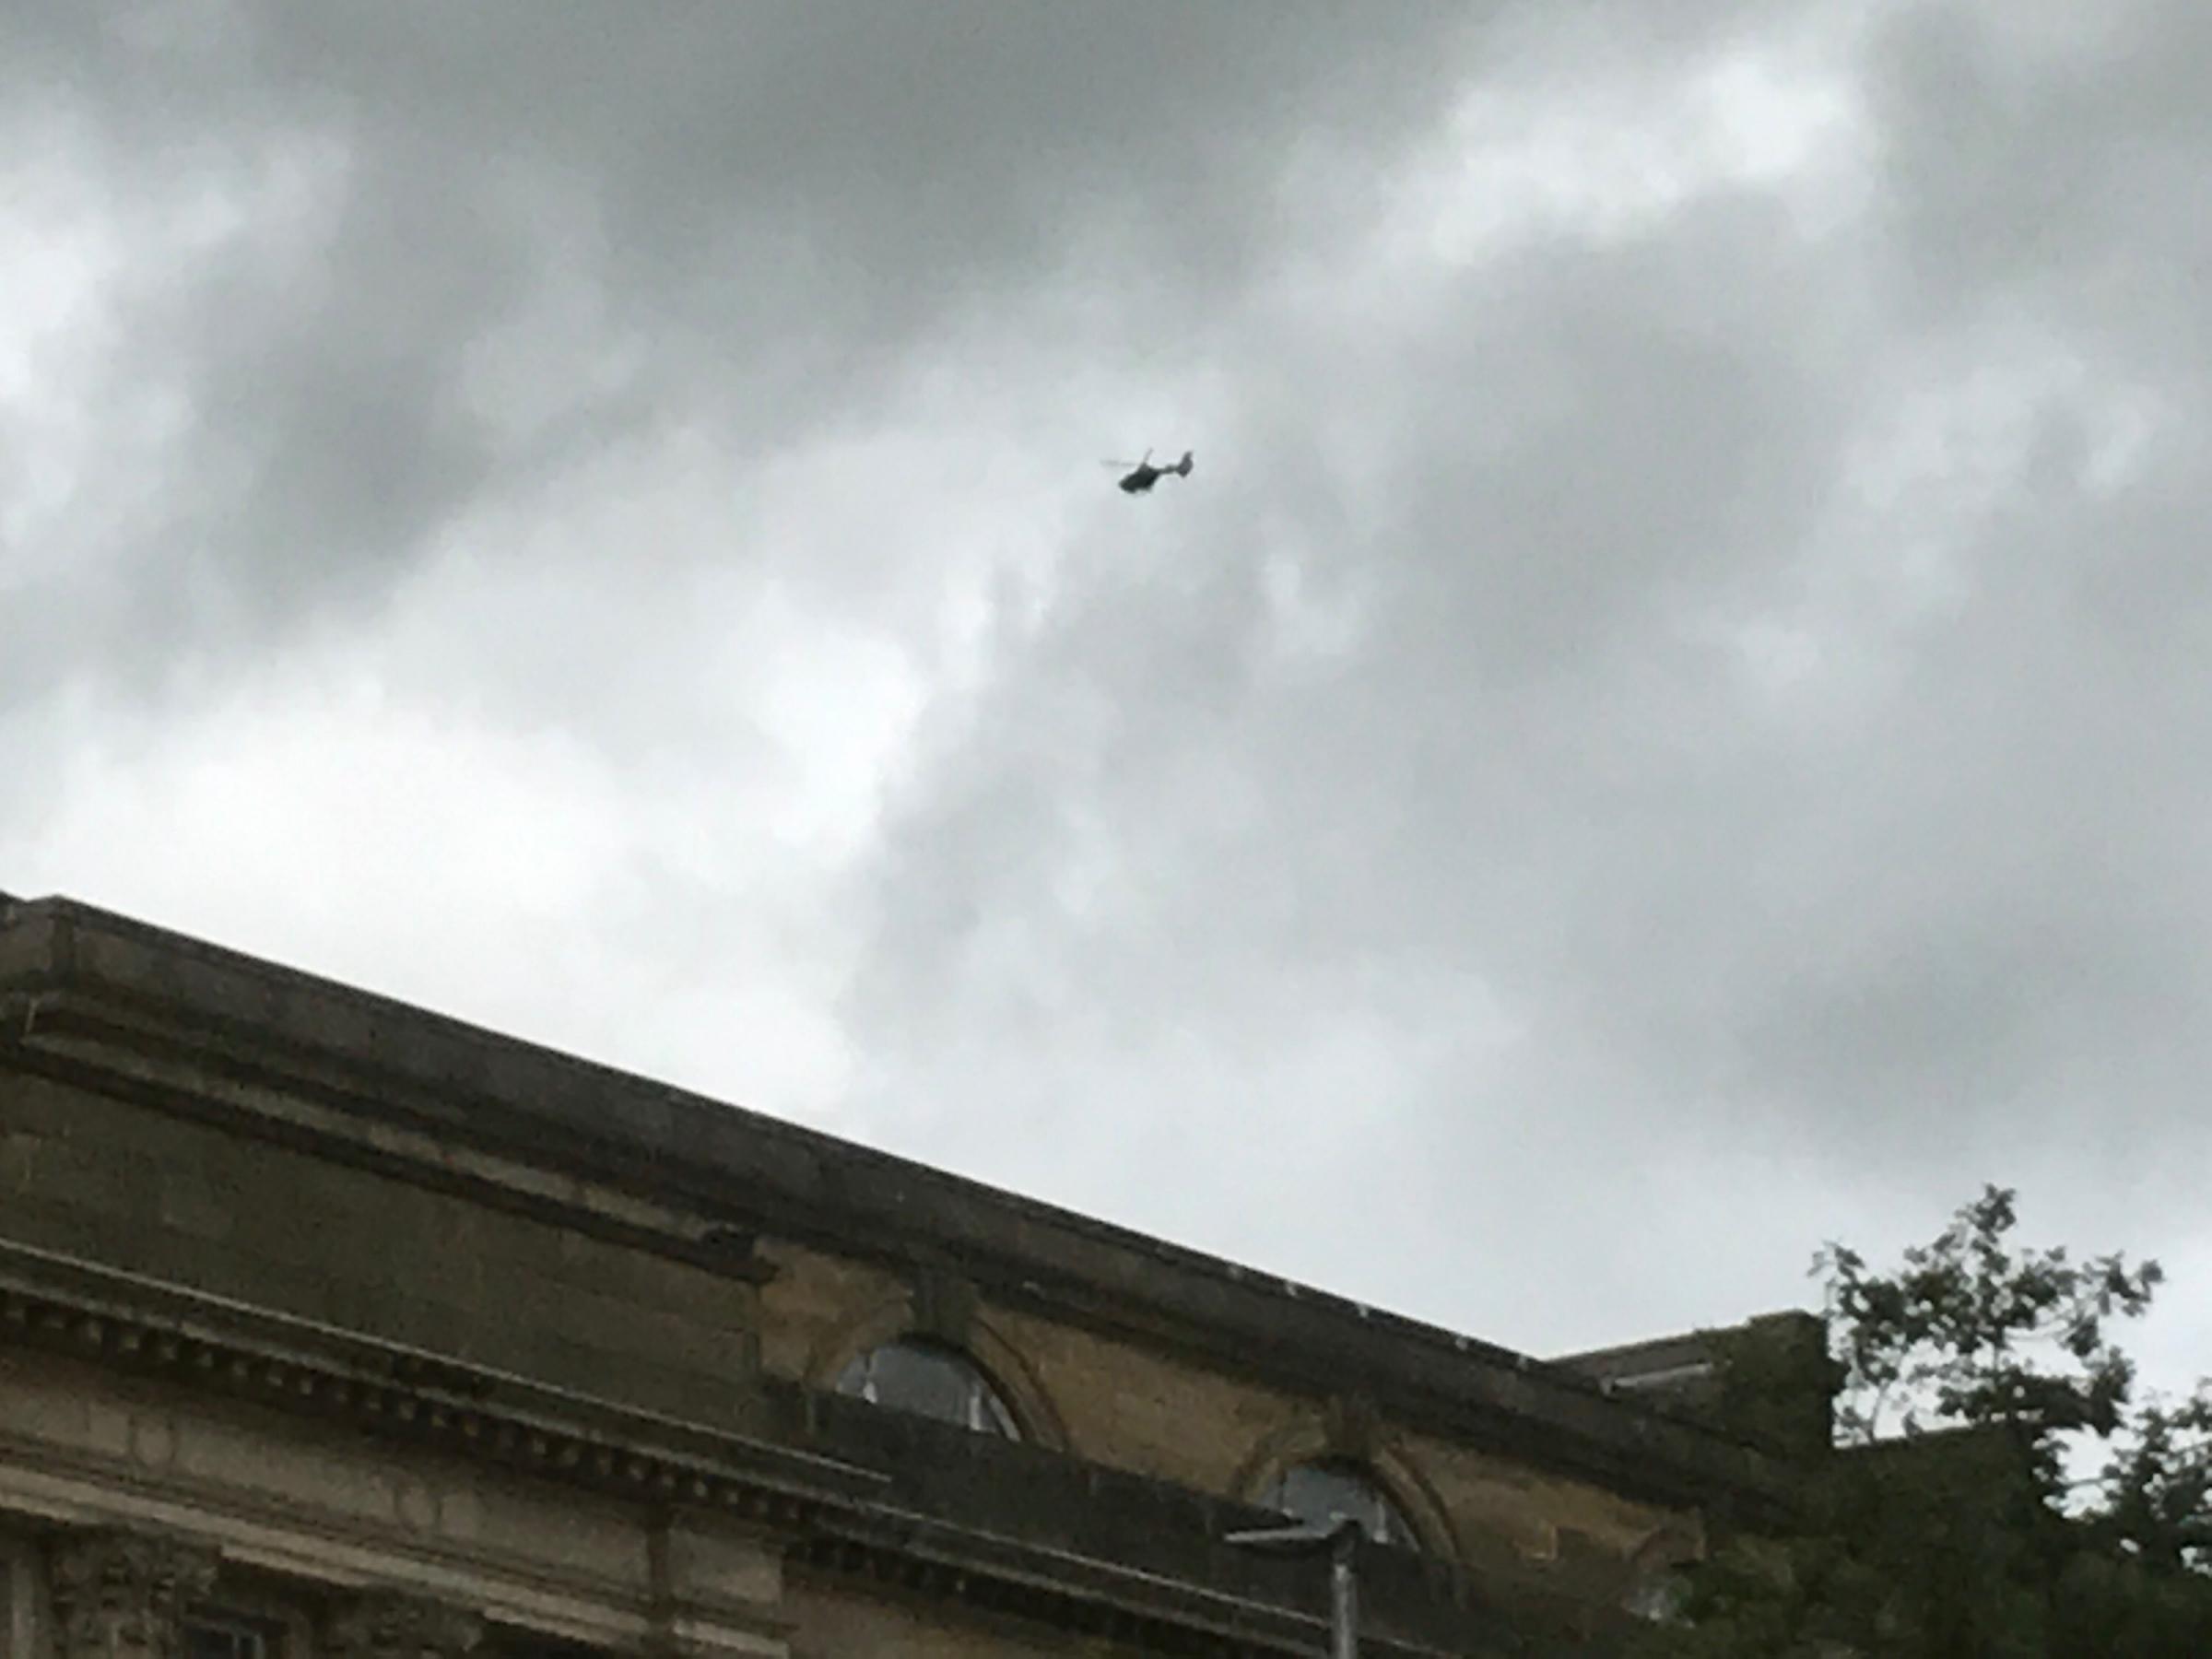 PICTURES/VIDEO: Police helicopter flying over town centre helps find missing four-year-old